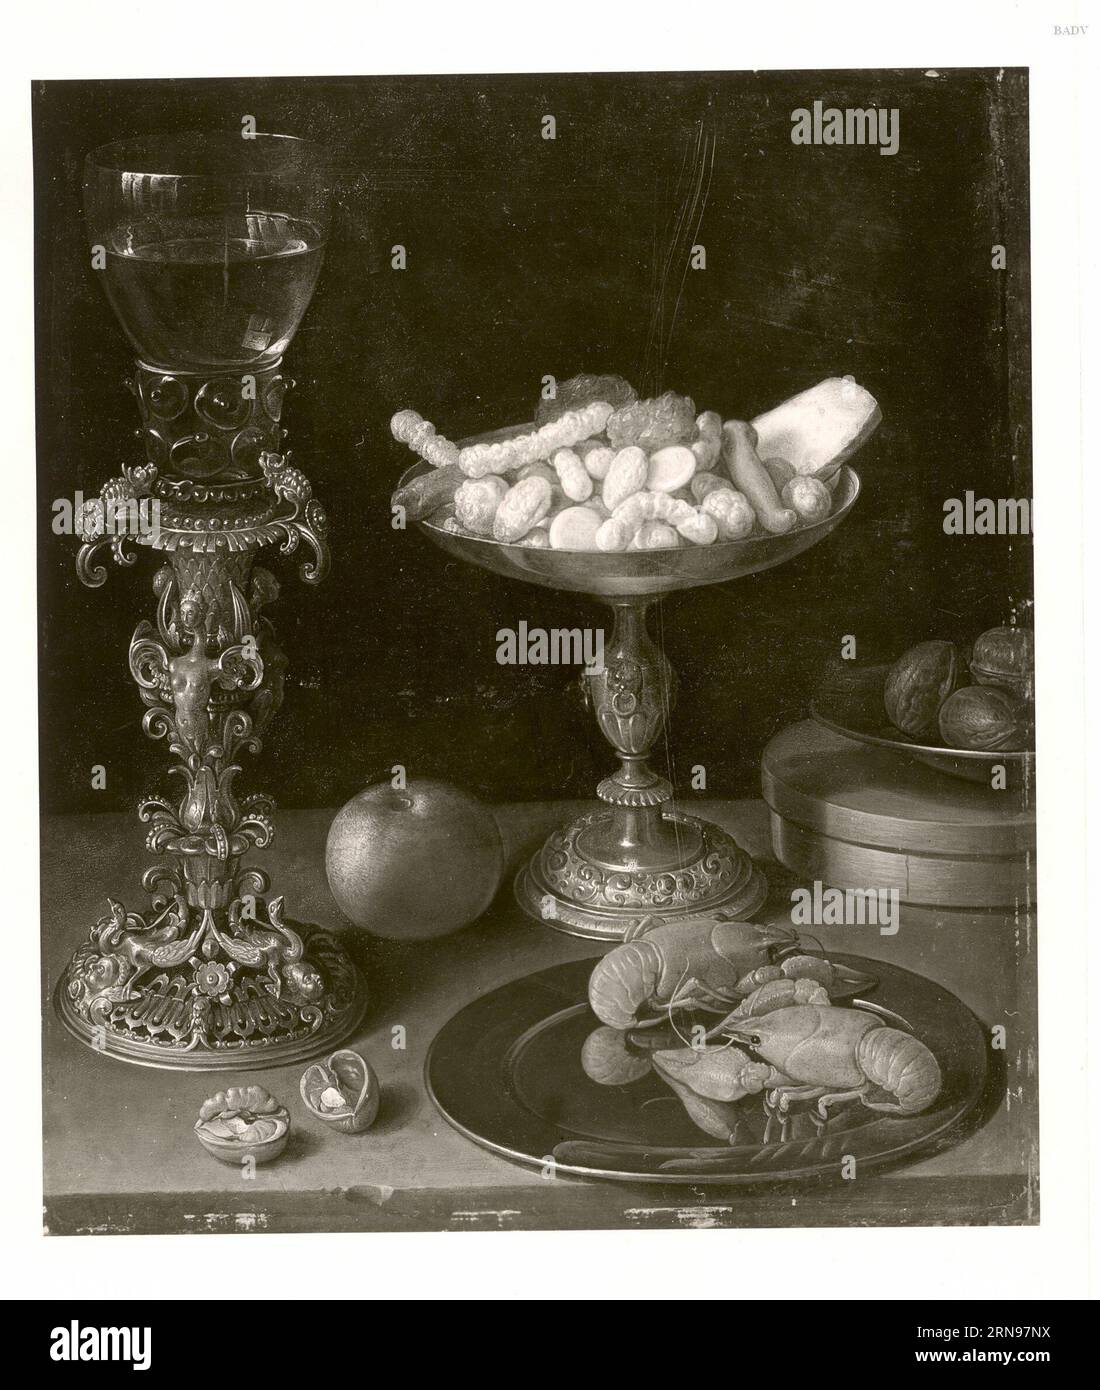 A roemer on a silver-gilt bekerschroef, sweetmeats in a silver tazza, langoustines on a plate, walnuts and an apple on a table top 1607 by Jeremias van Winghe Stock Photo